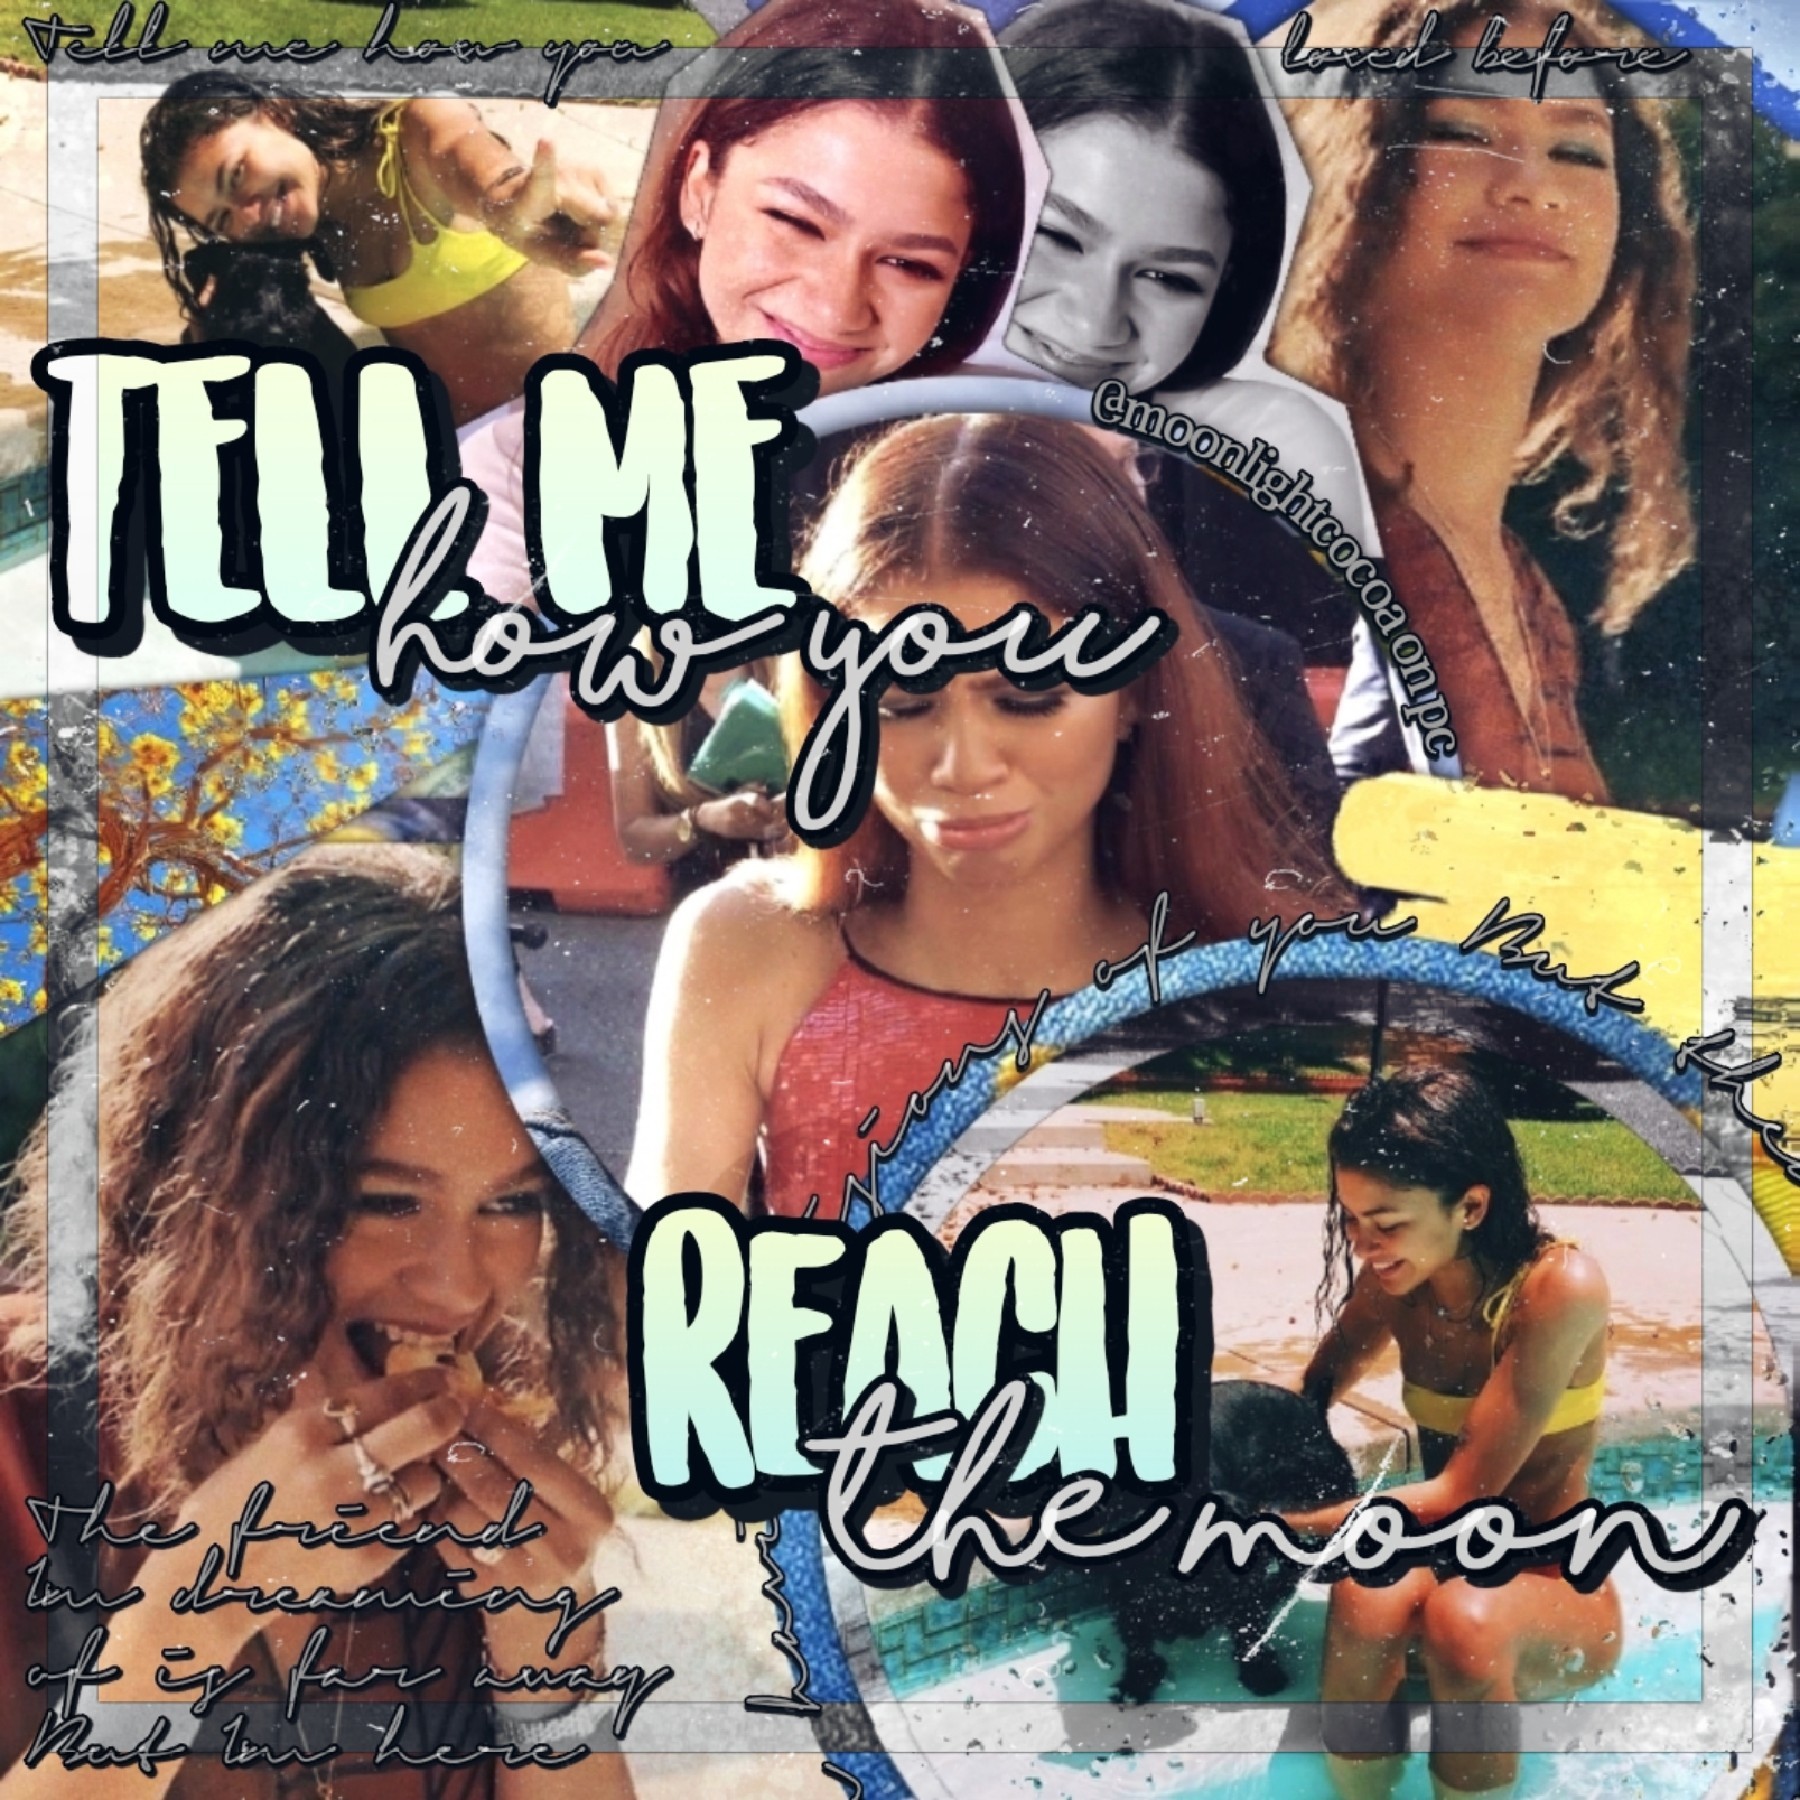 tap!💦💫
hii🌙 how are you guys??💞 sooo i actually made this edit in a bit of a rush, but i still wanted to post something✨ also aaah i love zendaya she's def on of my fav people on the planet😻 love uu have a great day everybody!🌈